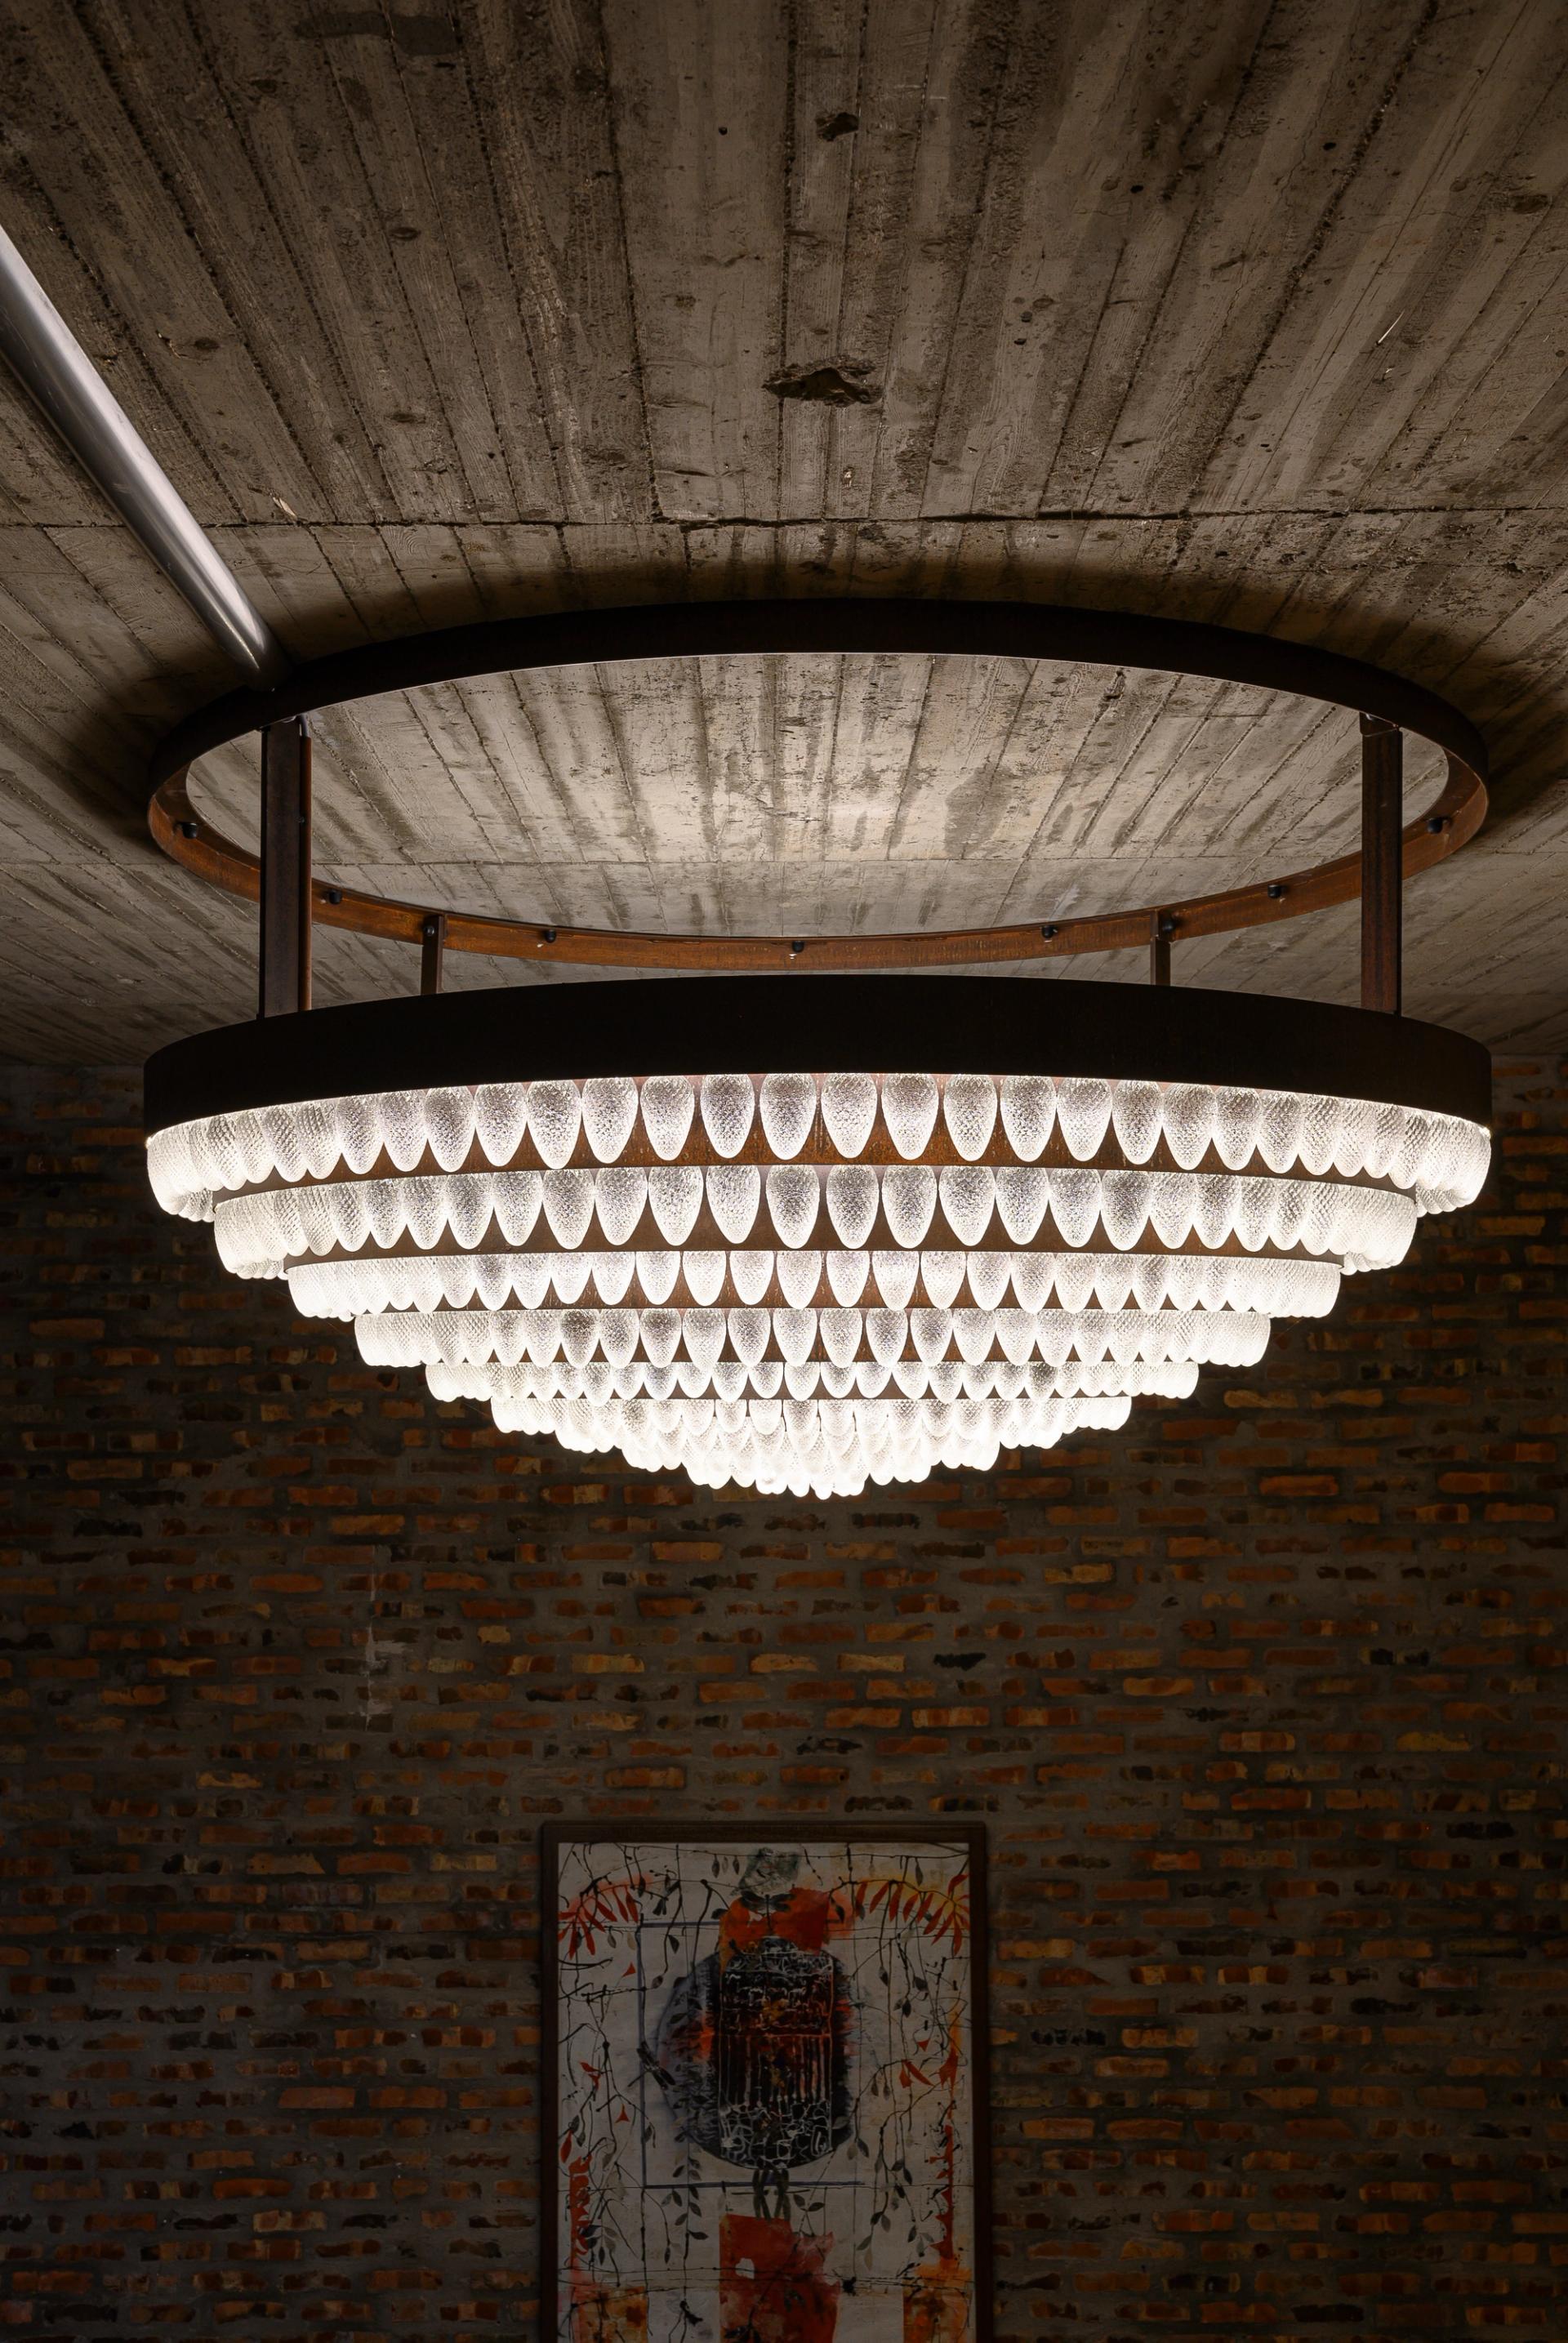 Chandelier hanging from a wooden ceiling